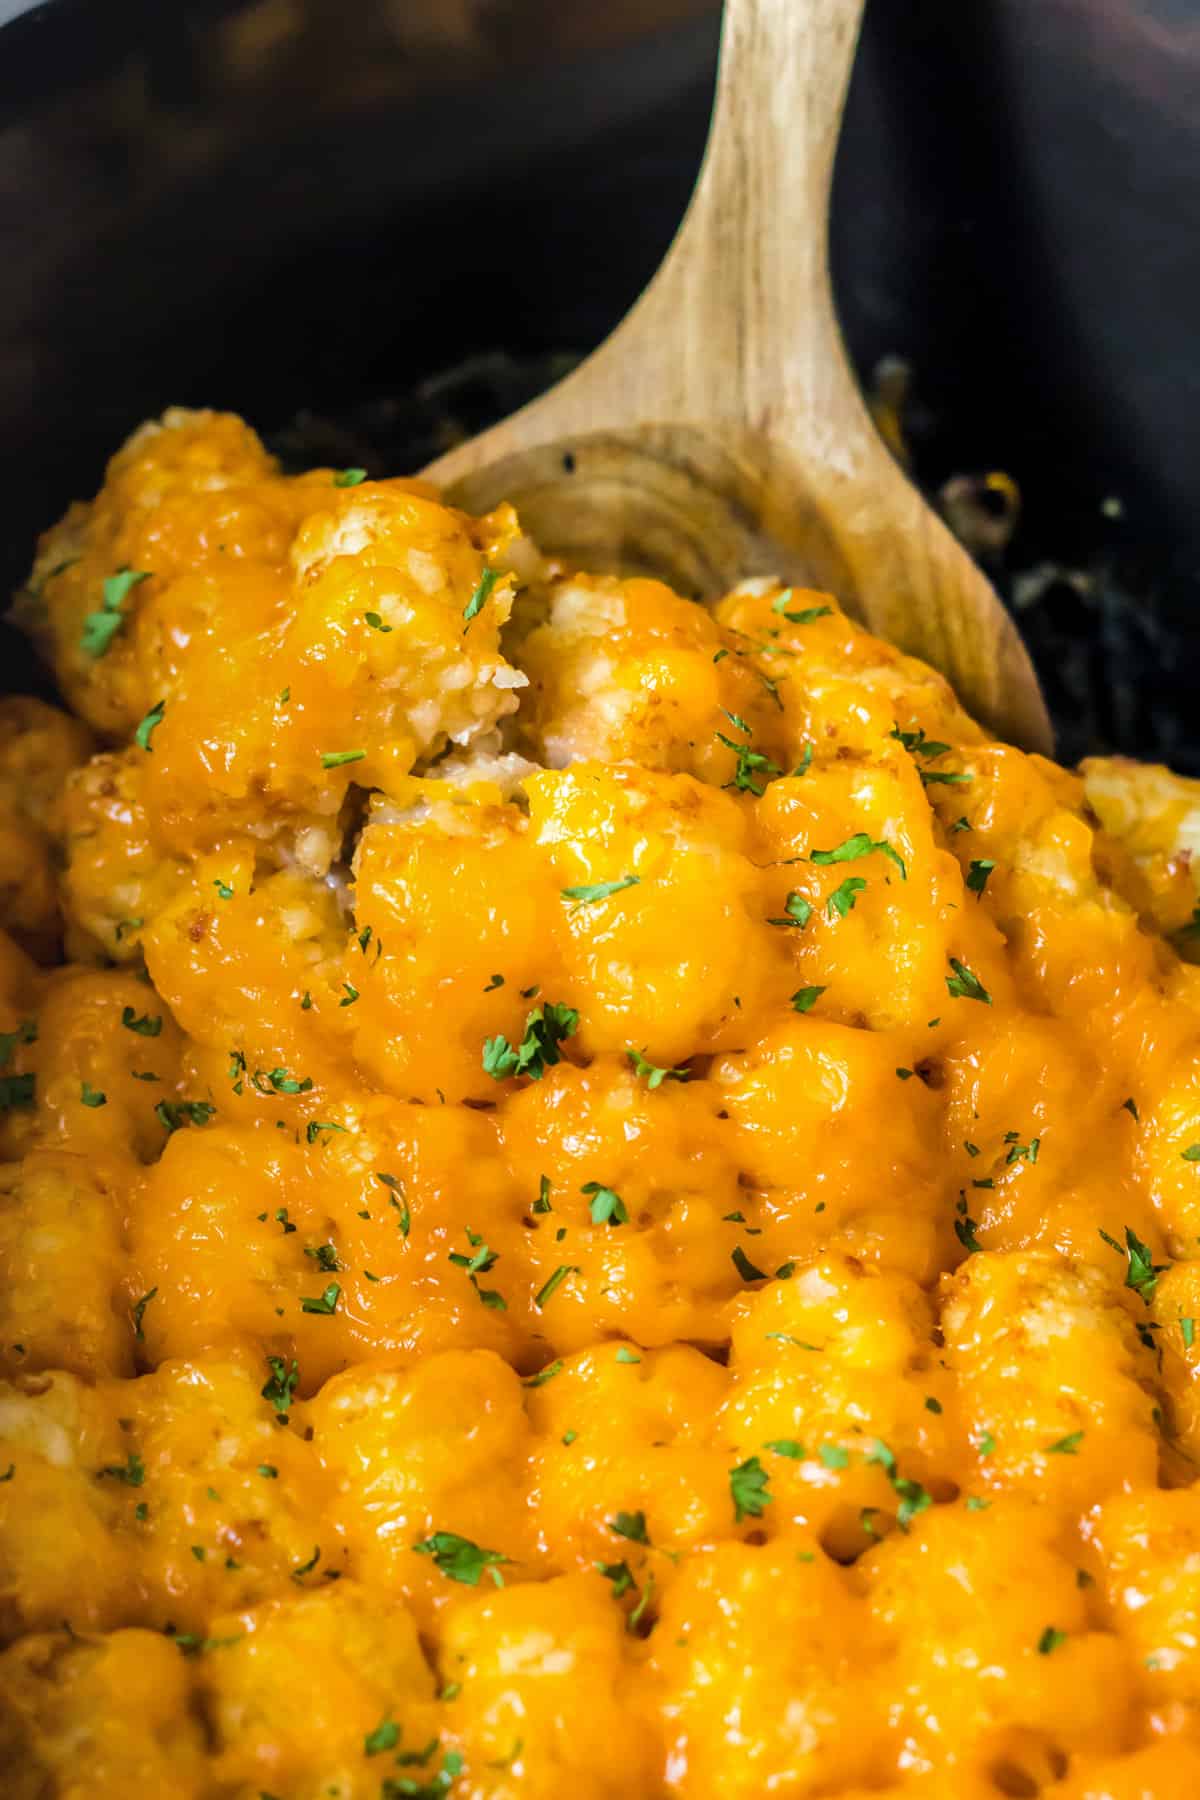 Wooden spoon in slow cooker tater tot casseorle.